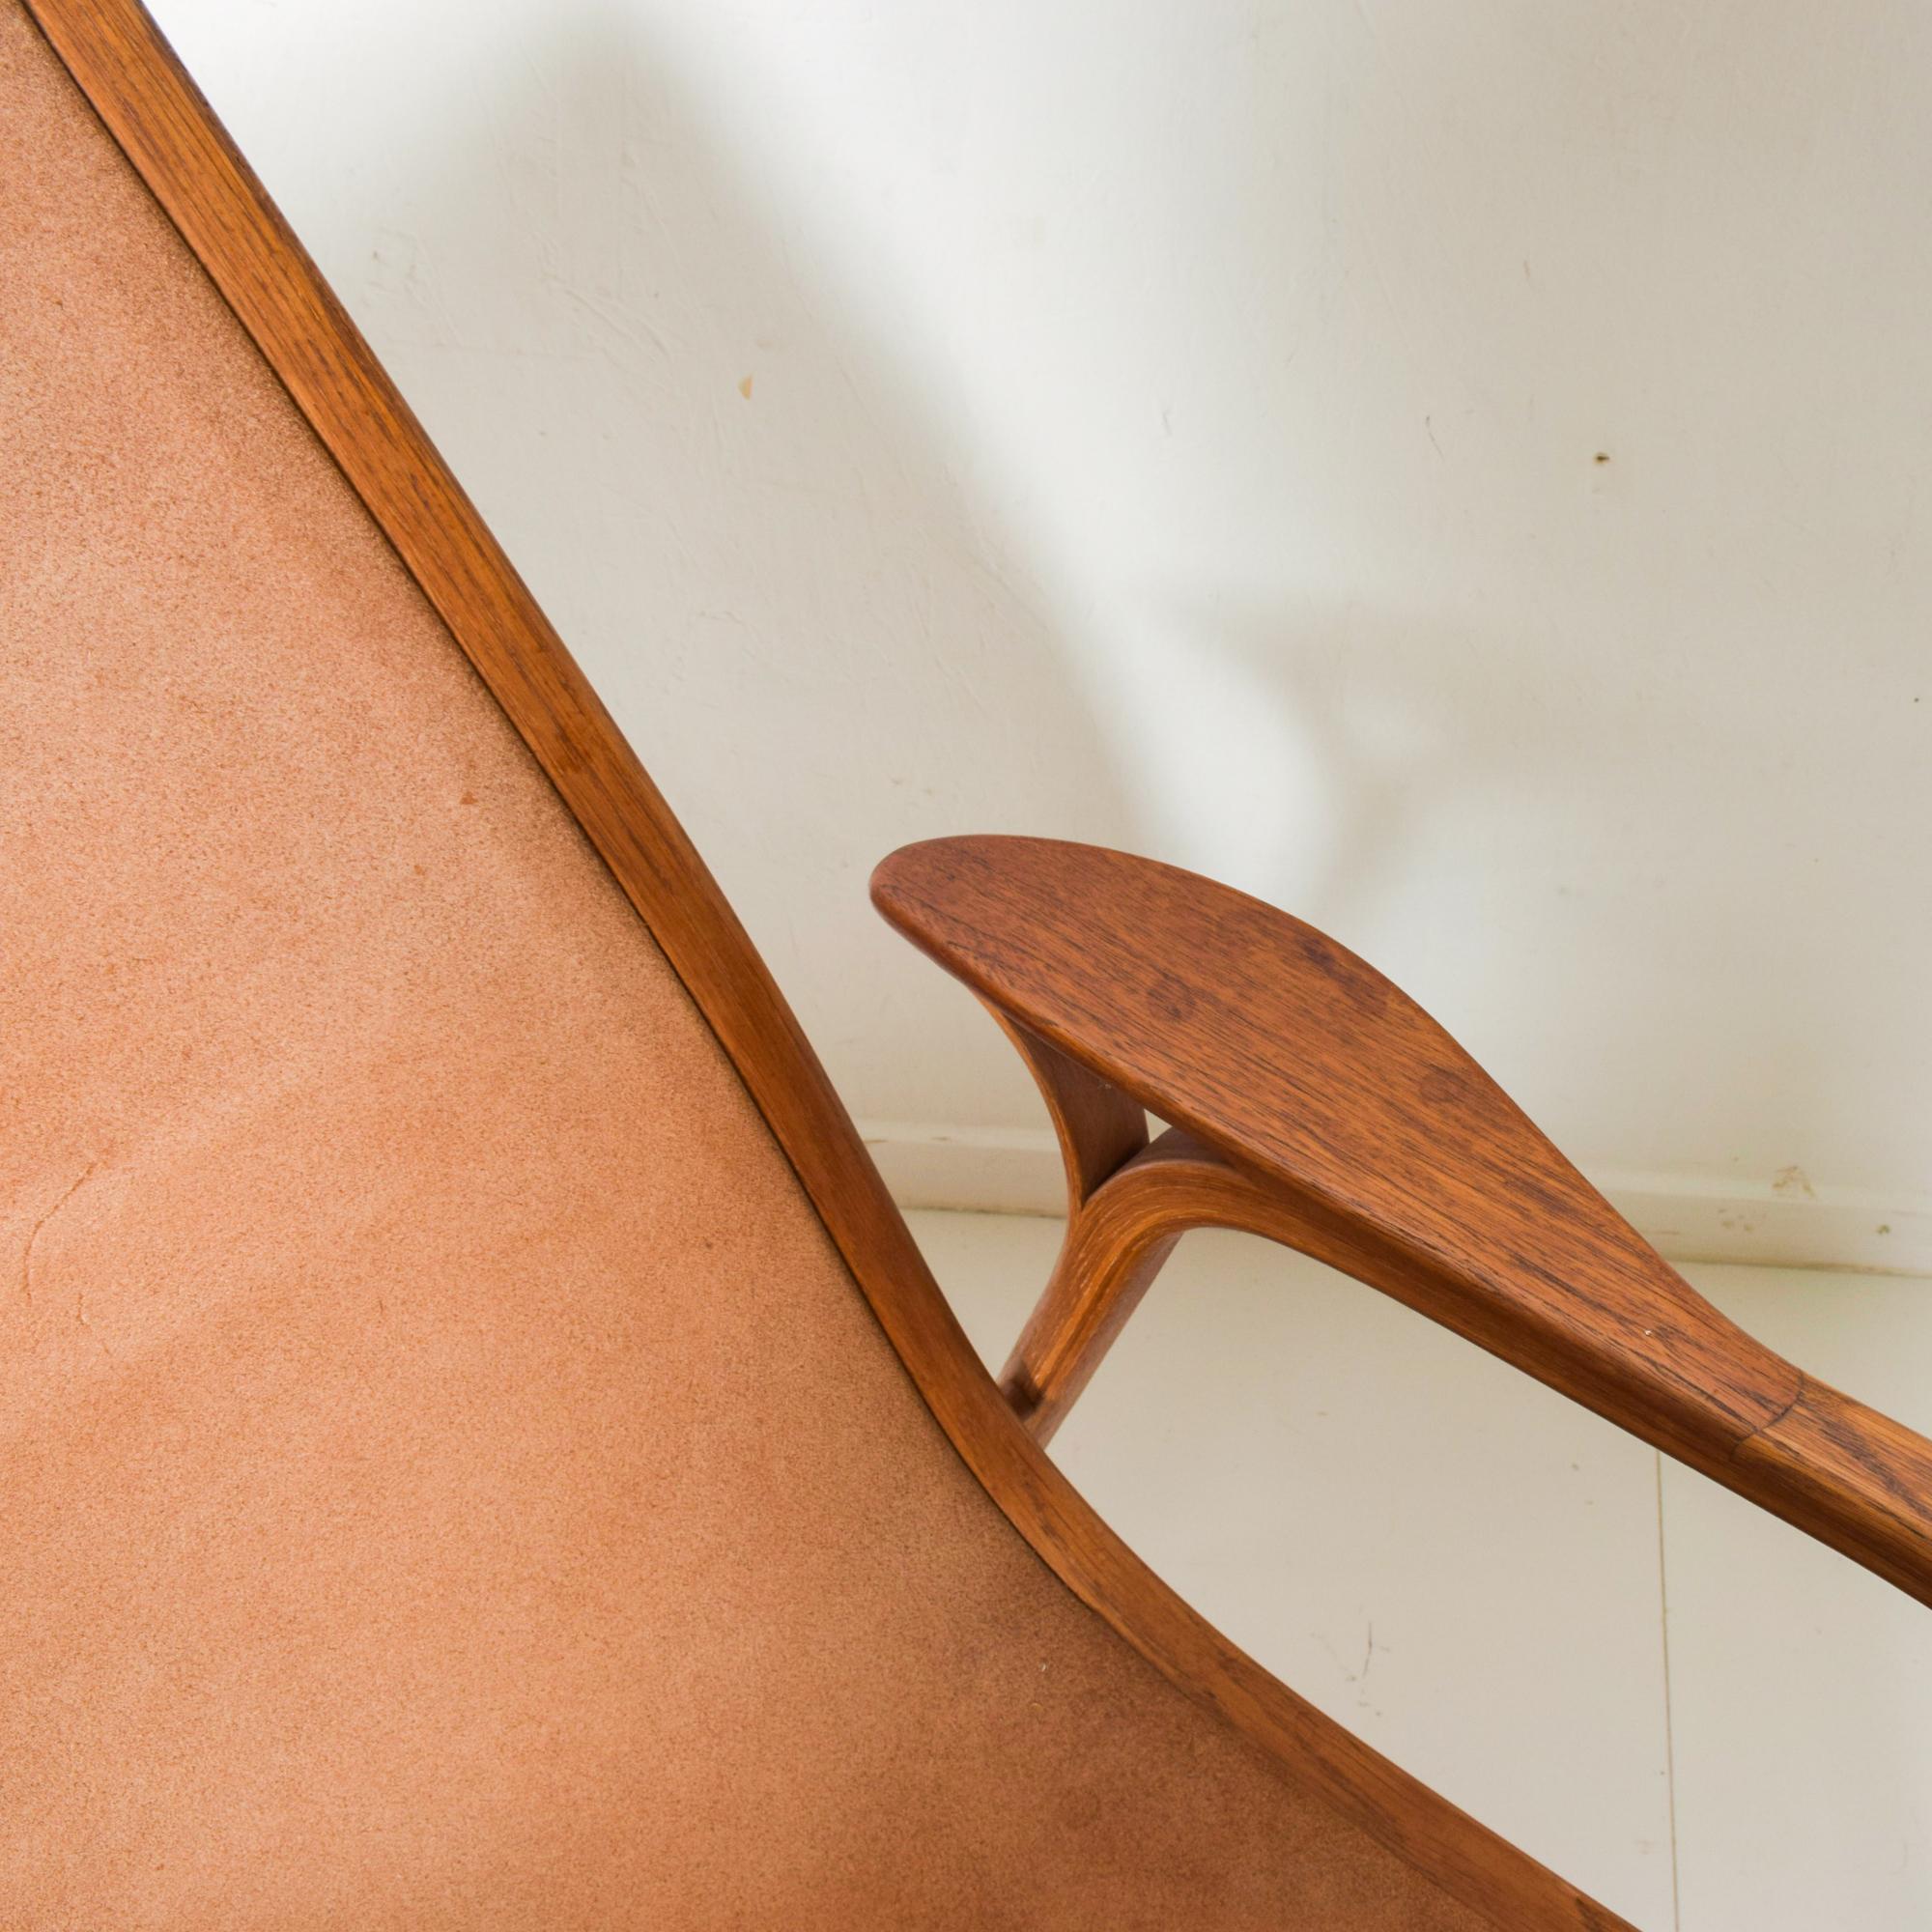 Classic Scandinavian Modern Lamino for Swedese easy lowback lounge chair in Cognac Suede leather and teak wood designed by Yngve Ekstrom, circa 1960s.
Dimensions: 30 1/2